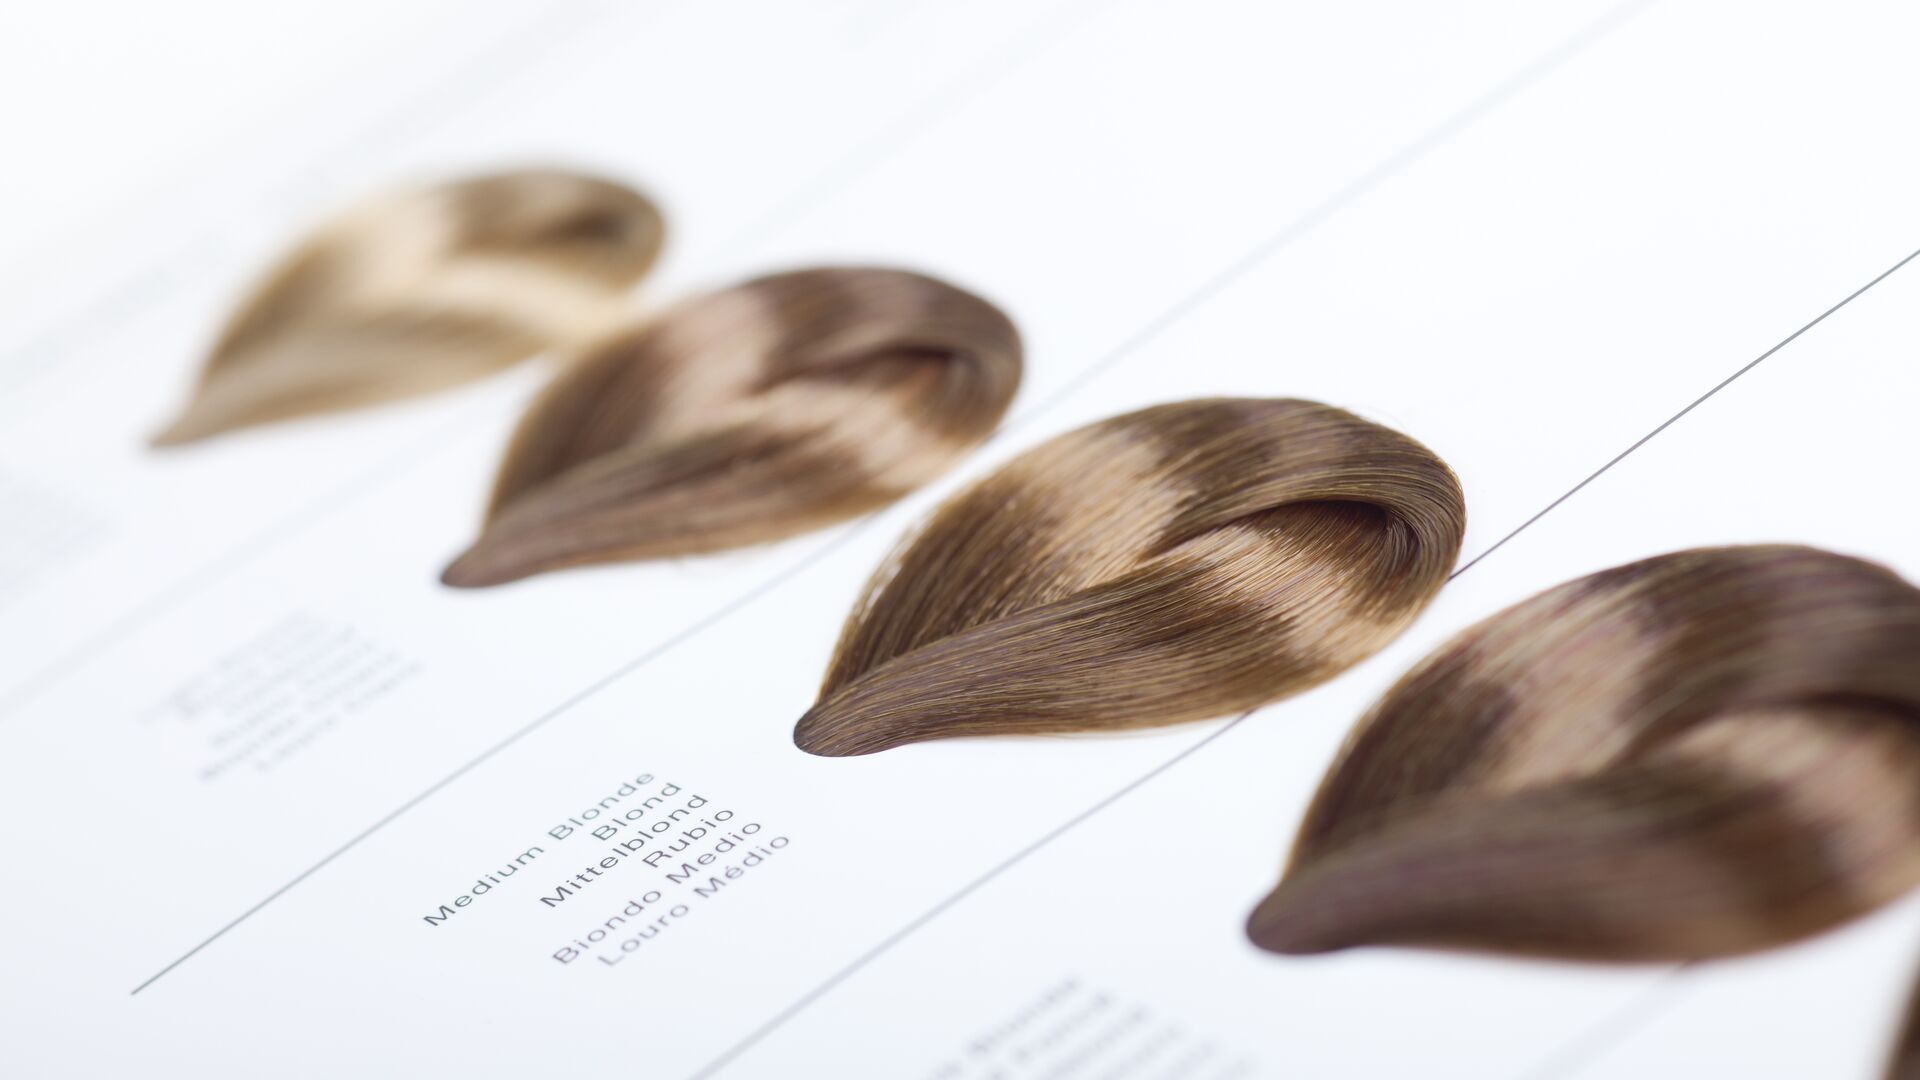 Hair color dye swatches against a white backdrop with short descriptions, medium blonde in a variety of languages. Meant to convey hair care, and hair coloring consumer markets.